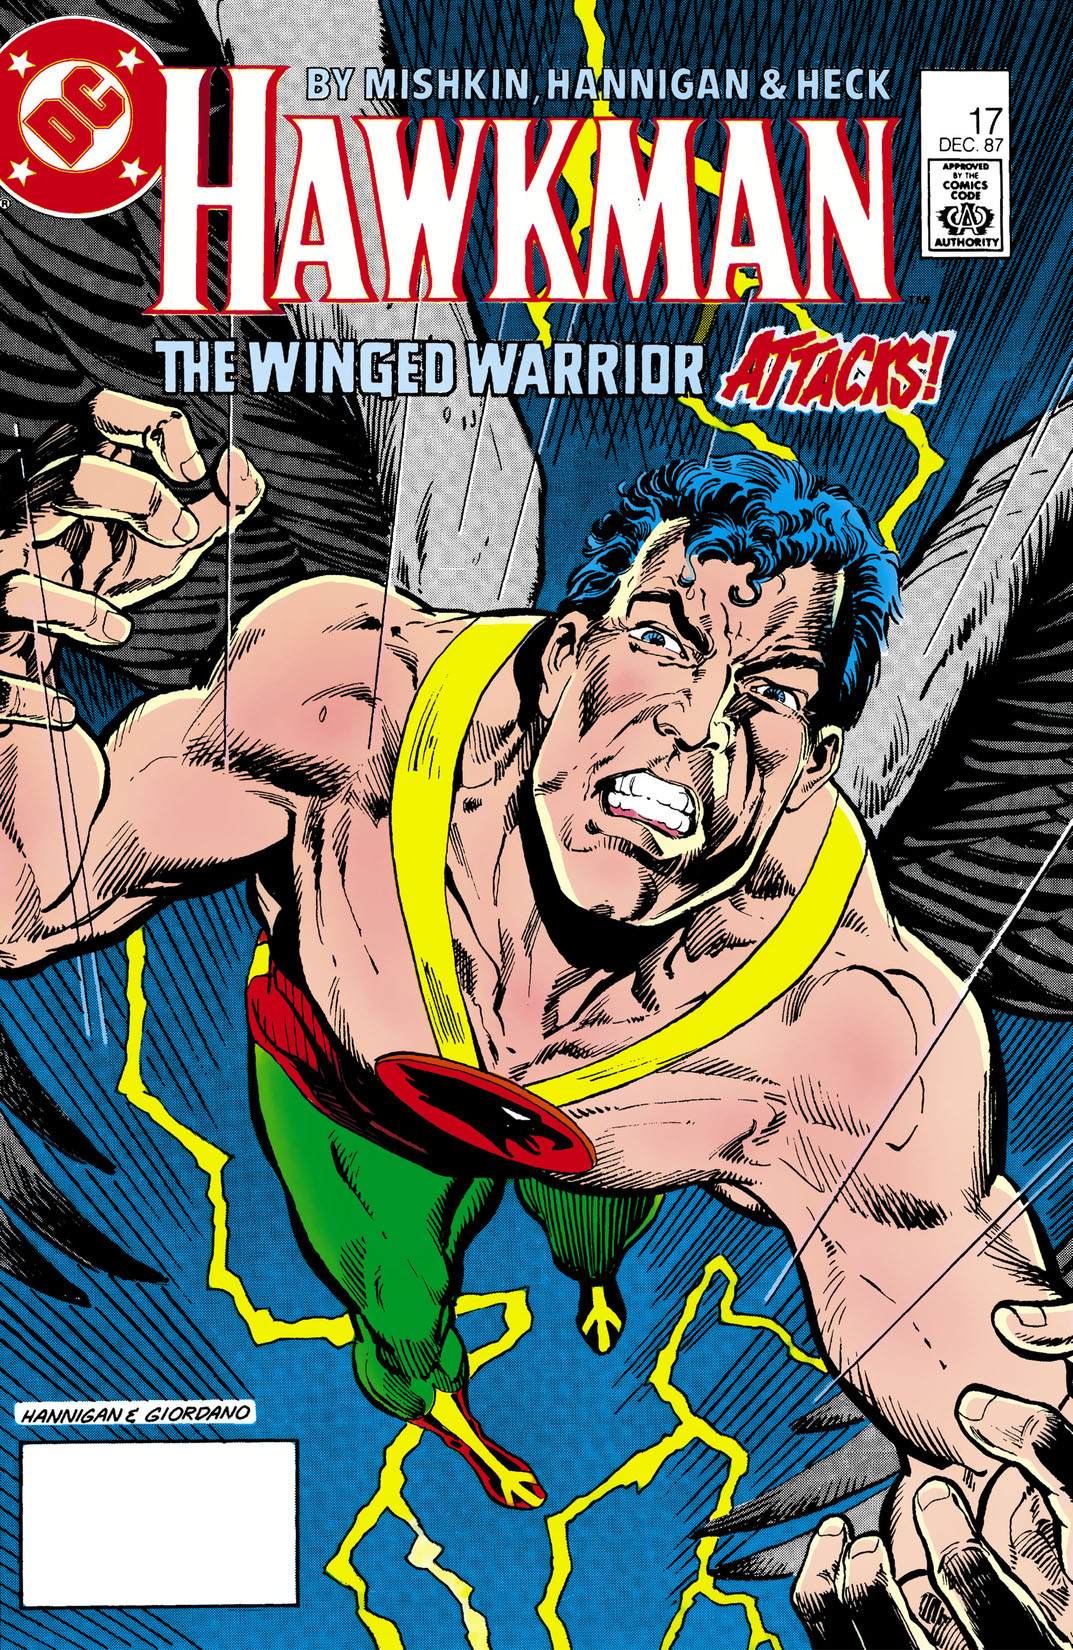 Hawkman (1986-1987) #17 preview images